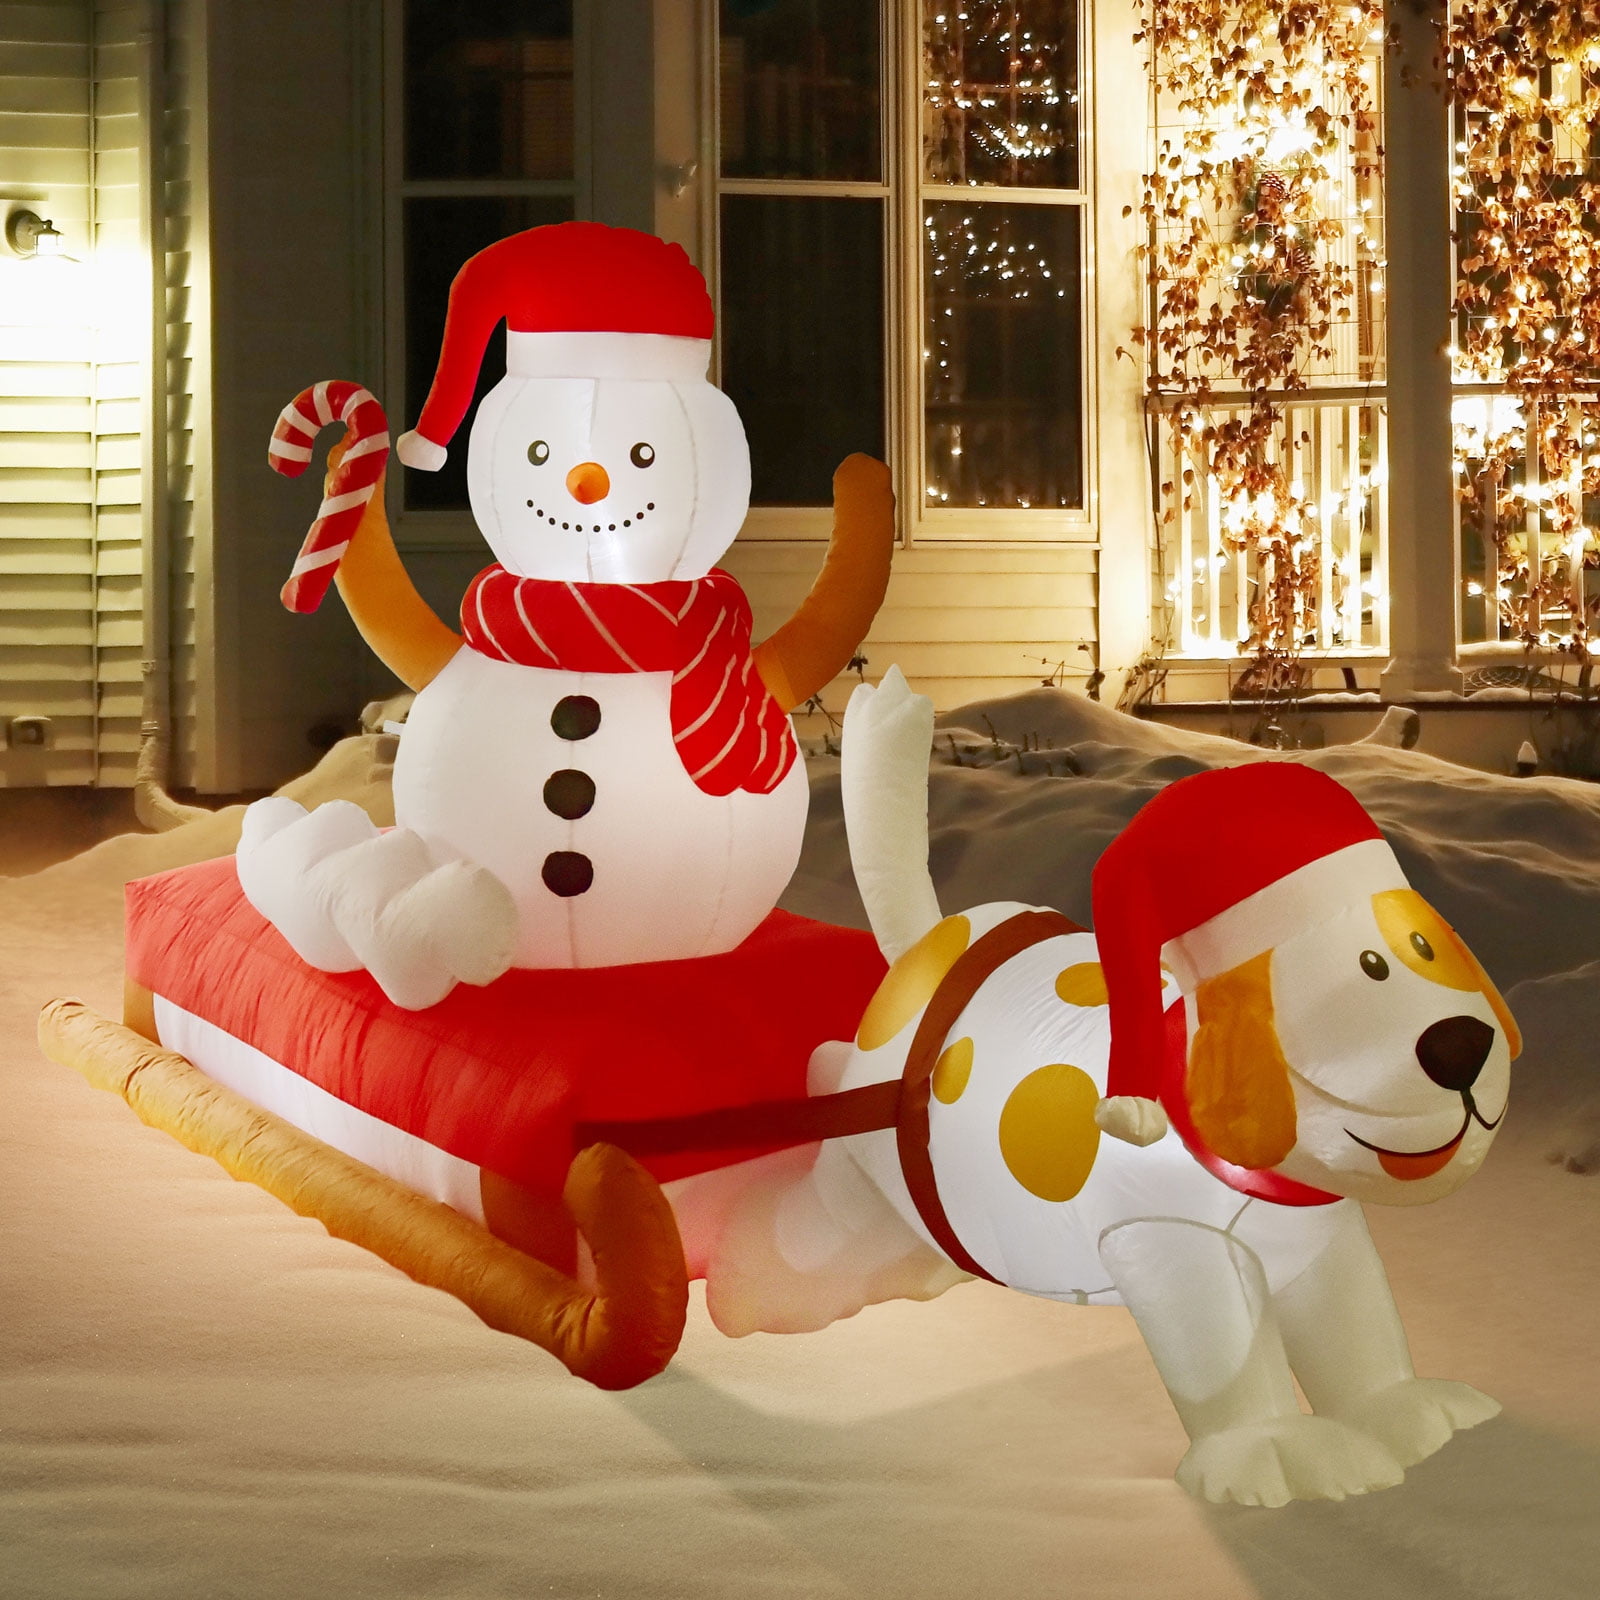 Nifti Nest 4.75 Ft Tall x 8 Ft Long Christmas Inflatable with Season's  Sled, Snowman, Cute Dog, Built-in LED Lights - Outdoor/Indoor Christmas